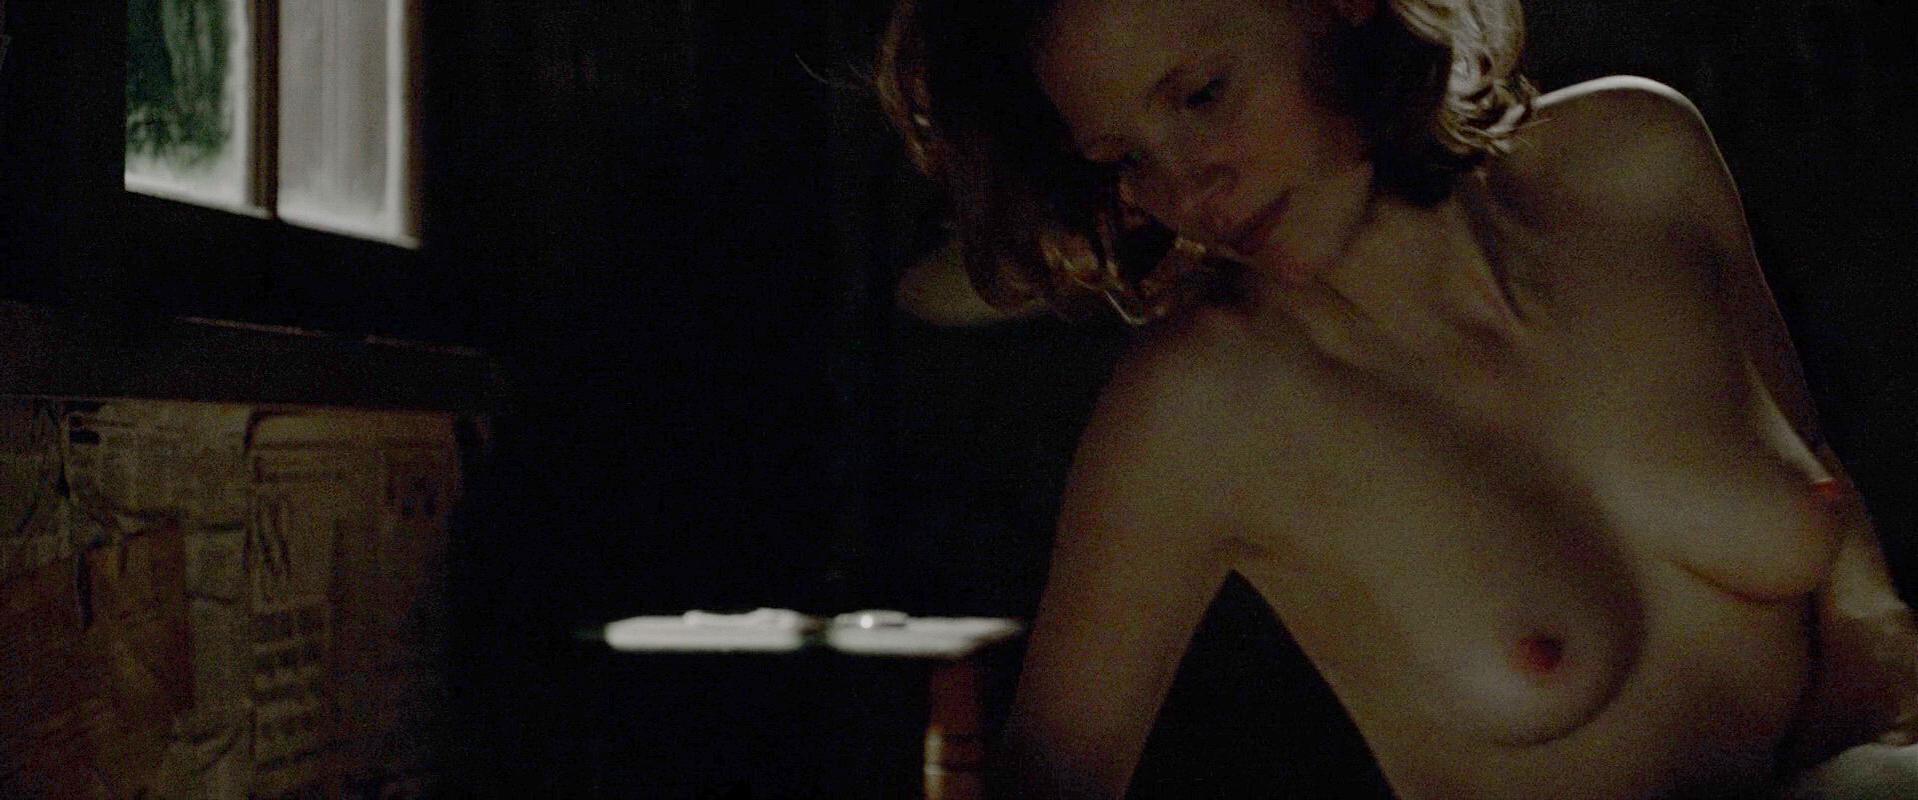 Jessica chastain lawless boobs